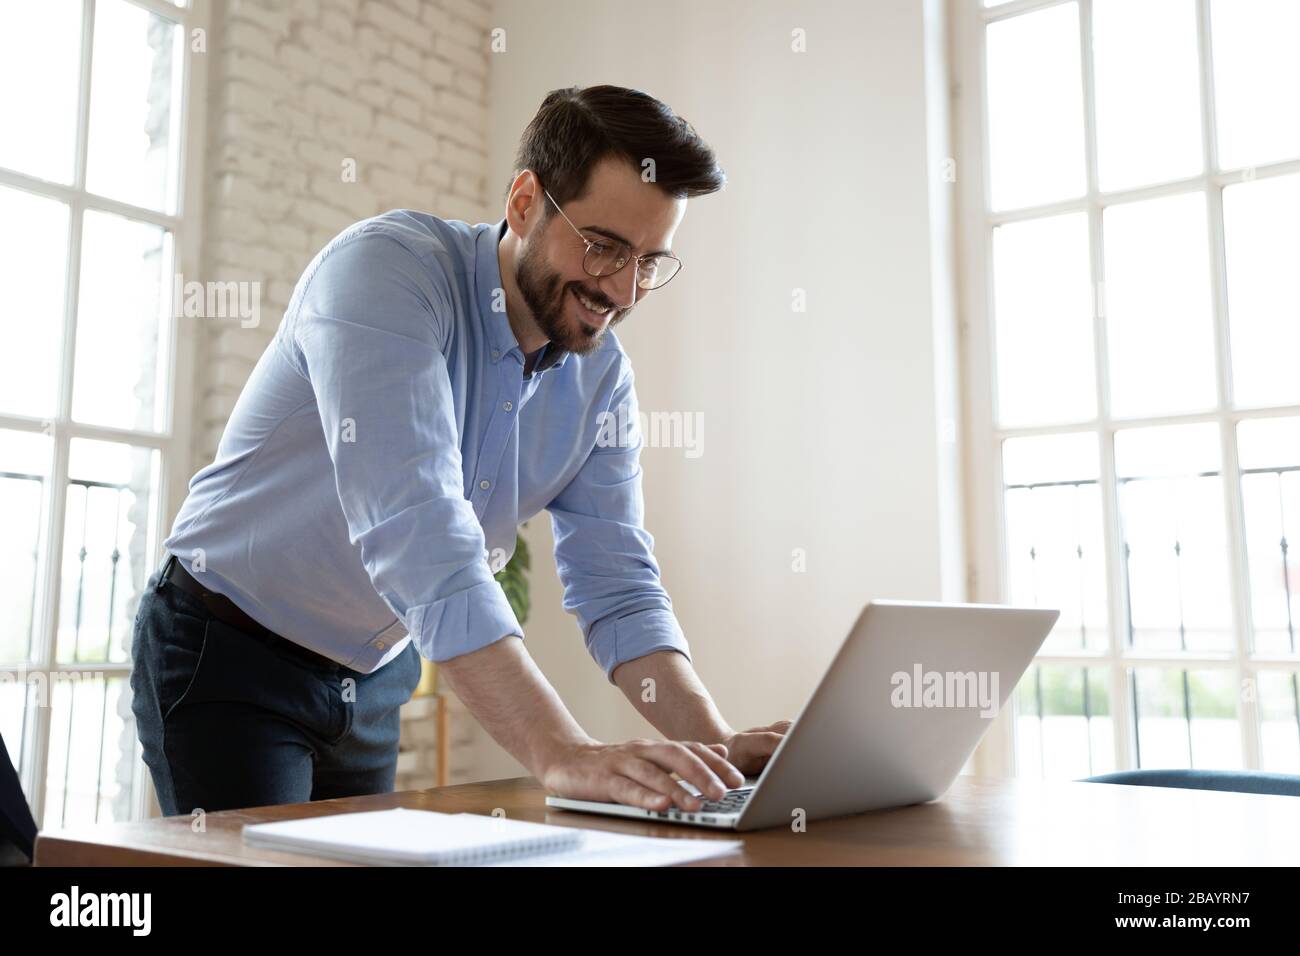 Businessman leaning over table in boardroom responds on business email Stock Photo